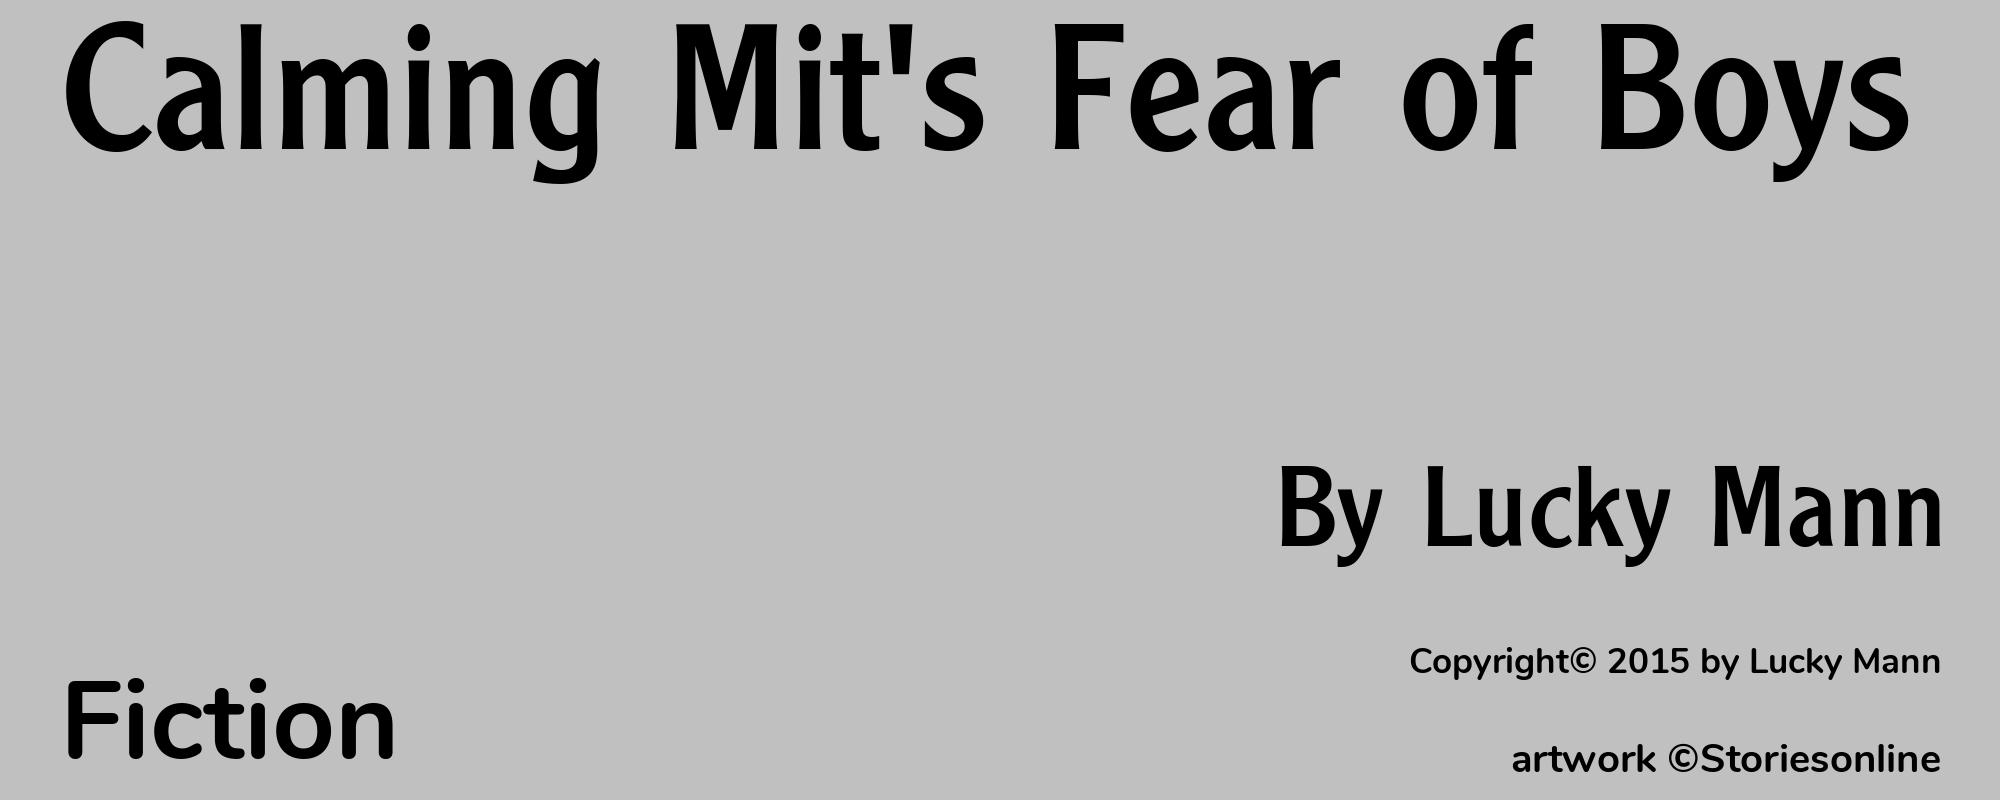 Calming Mit's Fear of Boys - Cover